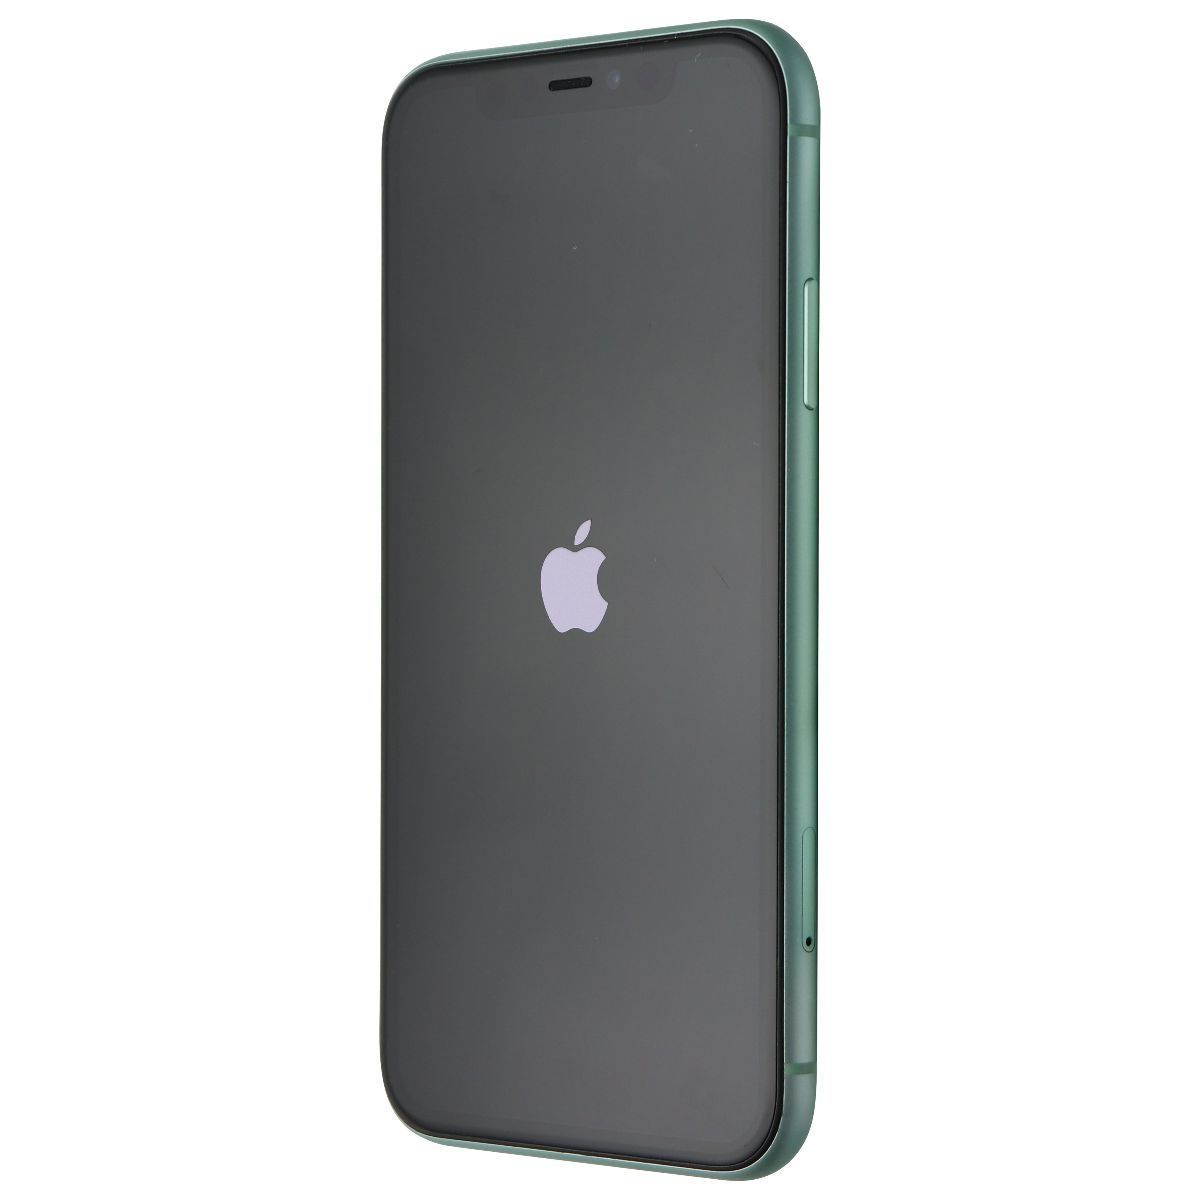 Apple iPhone 11 (6.1-inch) Smartphone (A2111) Unlocked - 64GB / Green Cell Phones & Smartphones Apple    - Simple Cell Bulk Wholesale Pricing - USA Seller